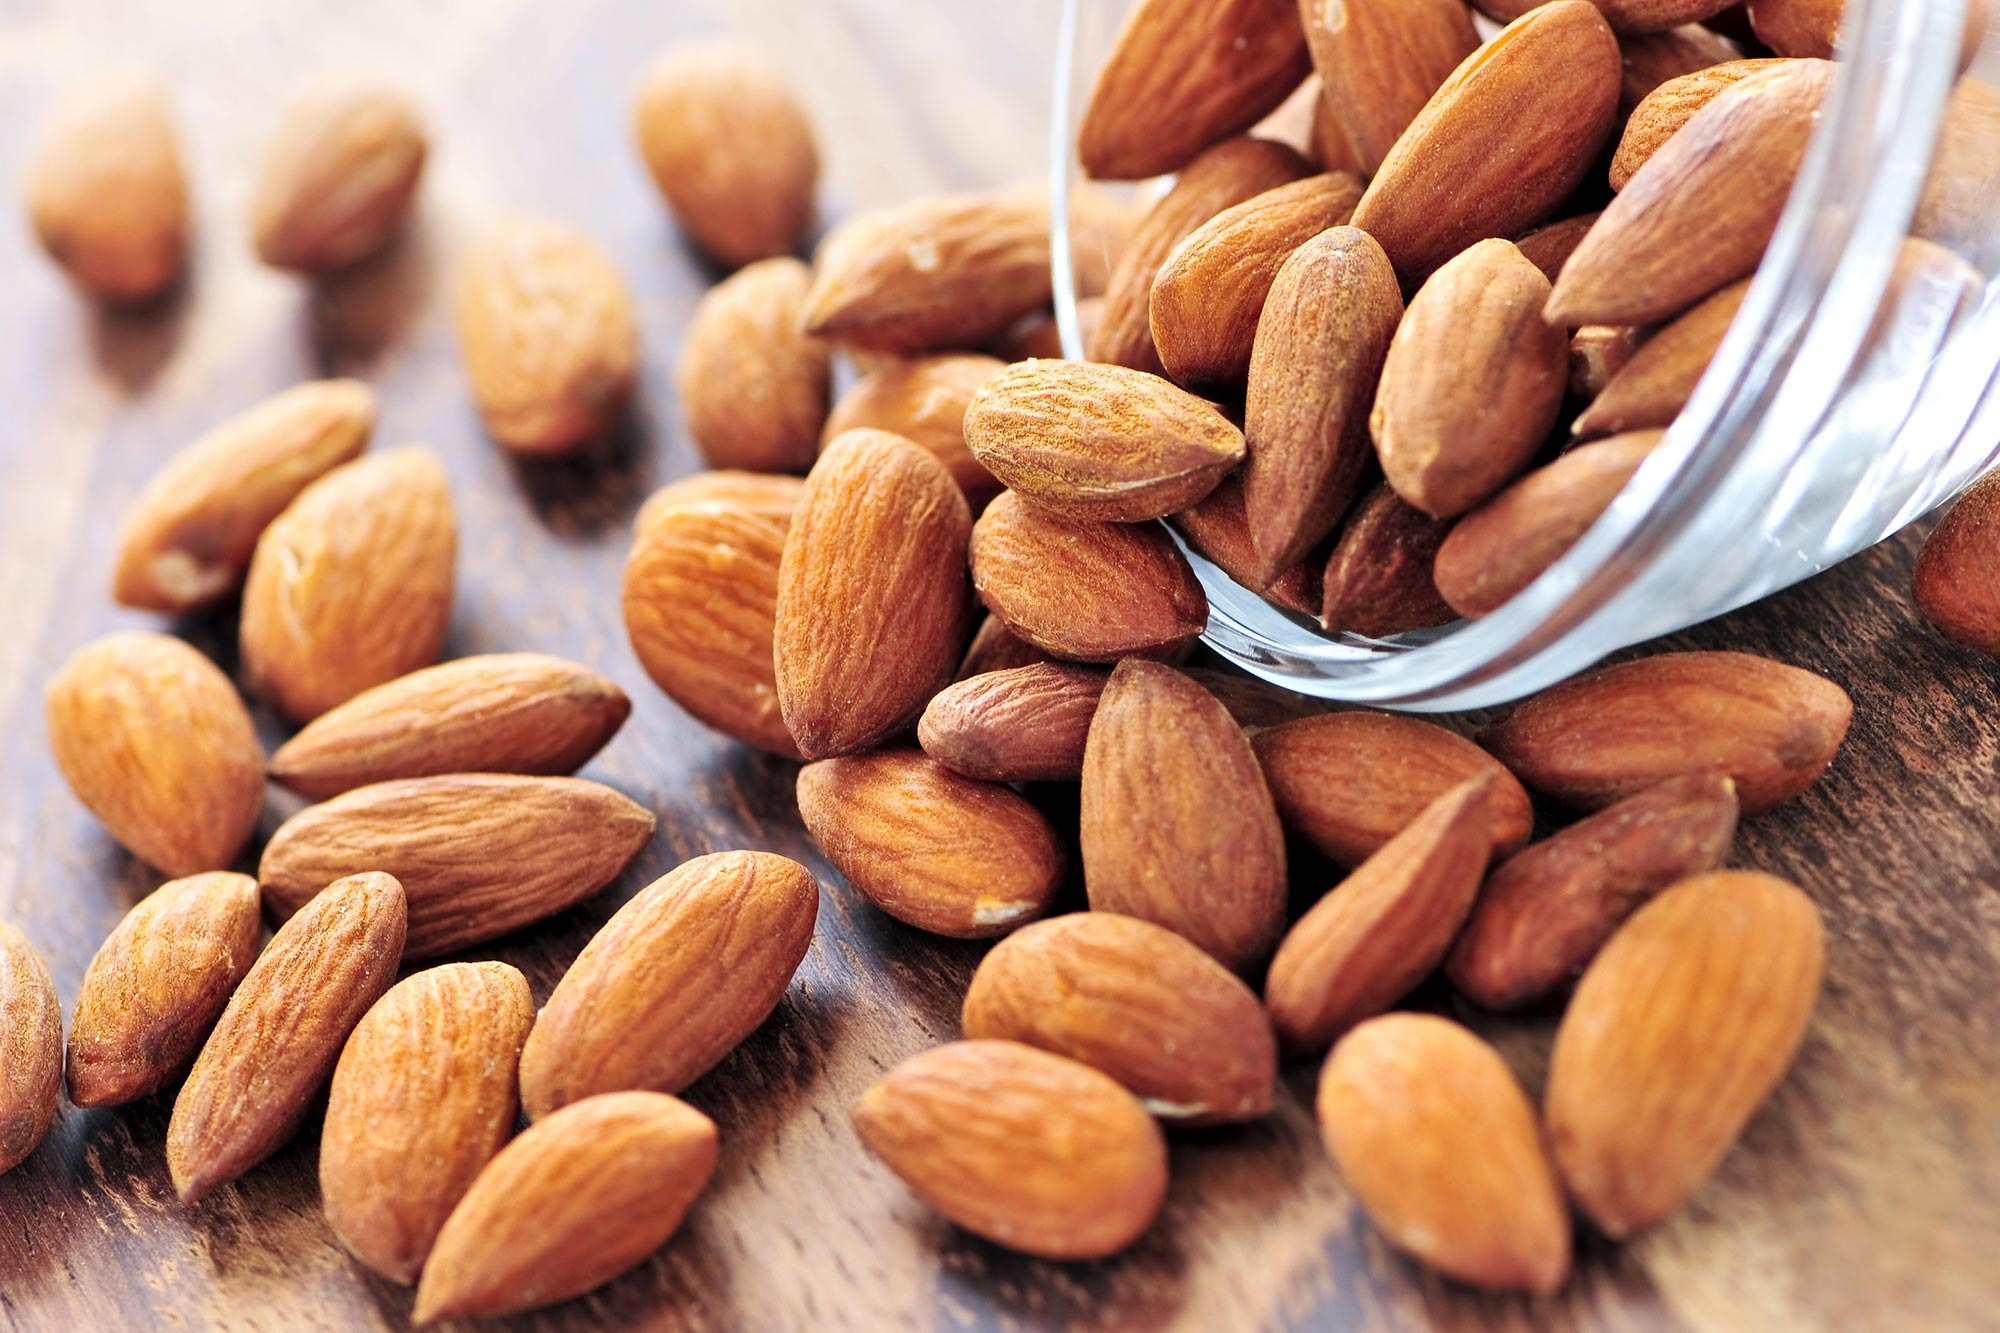 Make Almonds a Part of Your Daily Diet